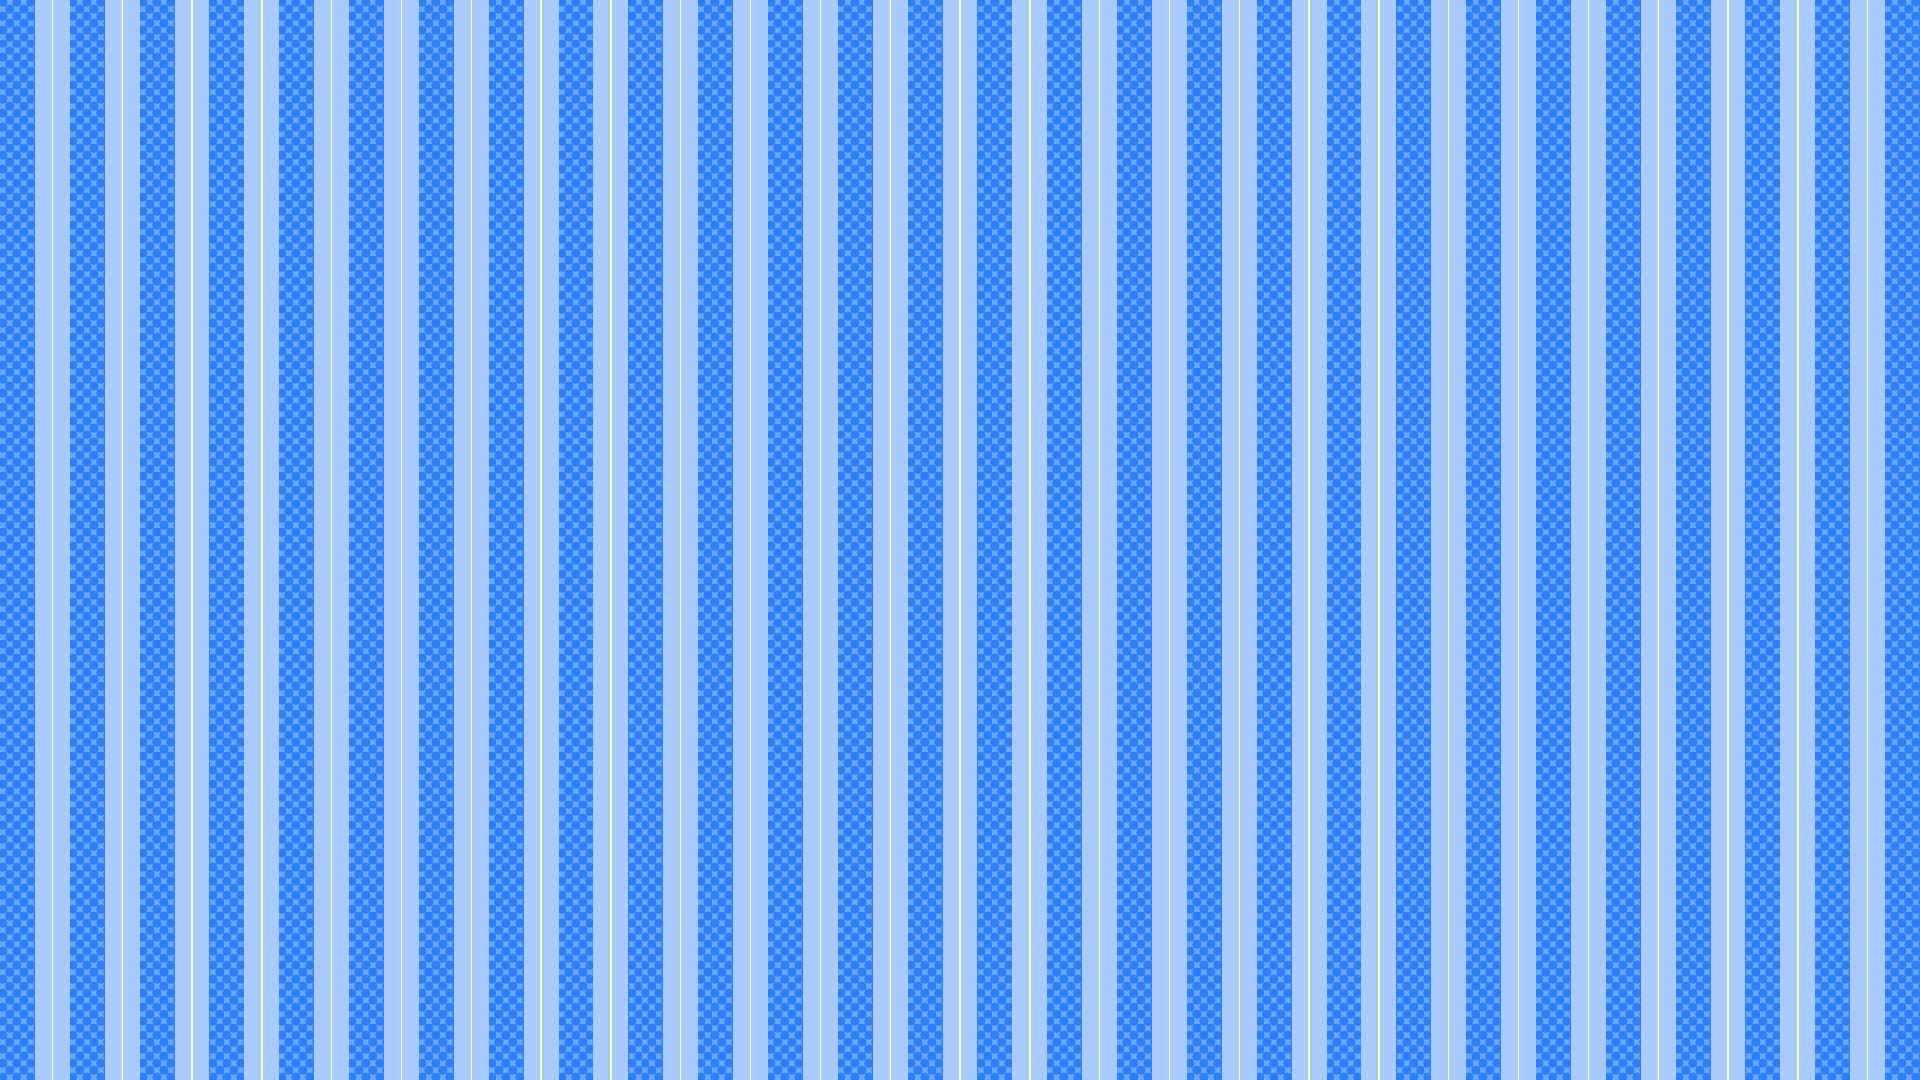 Vertical Blue Stripess and Images  s  Clipart